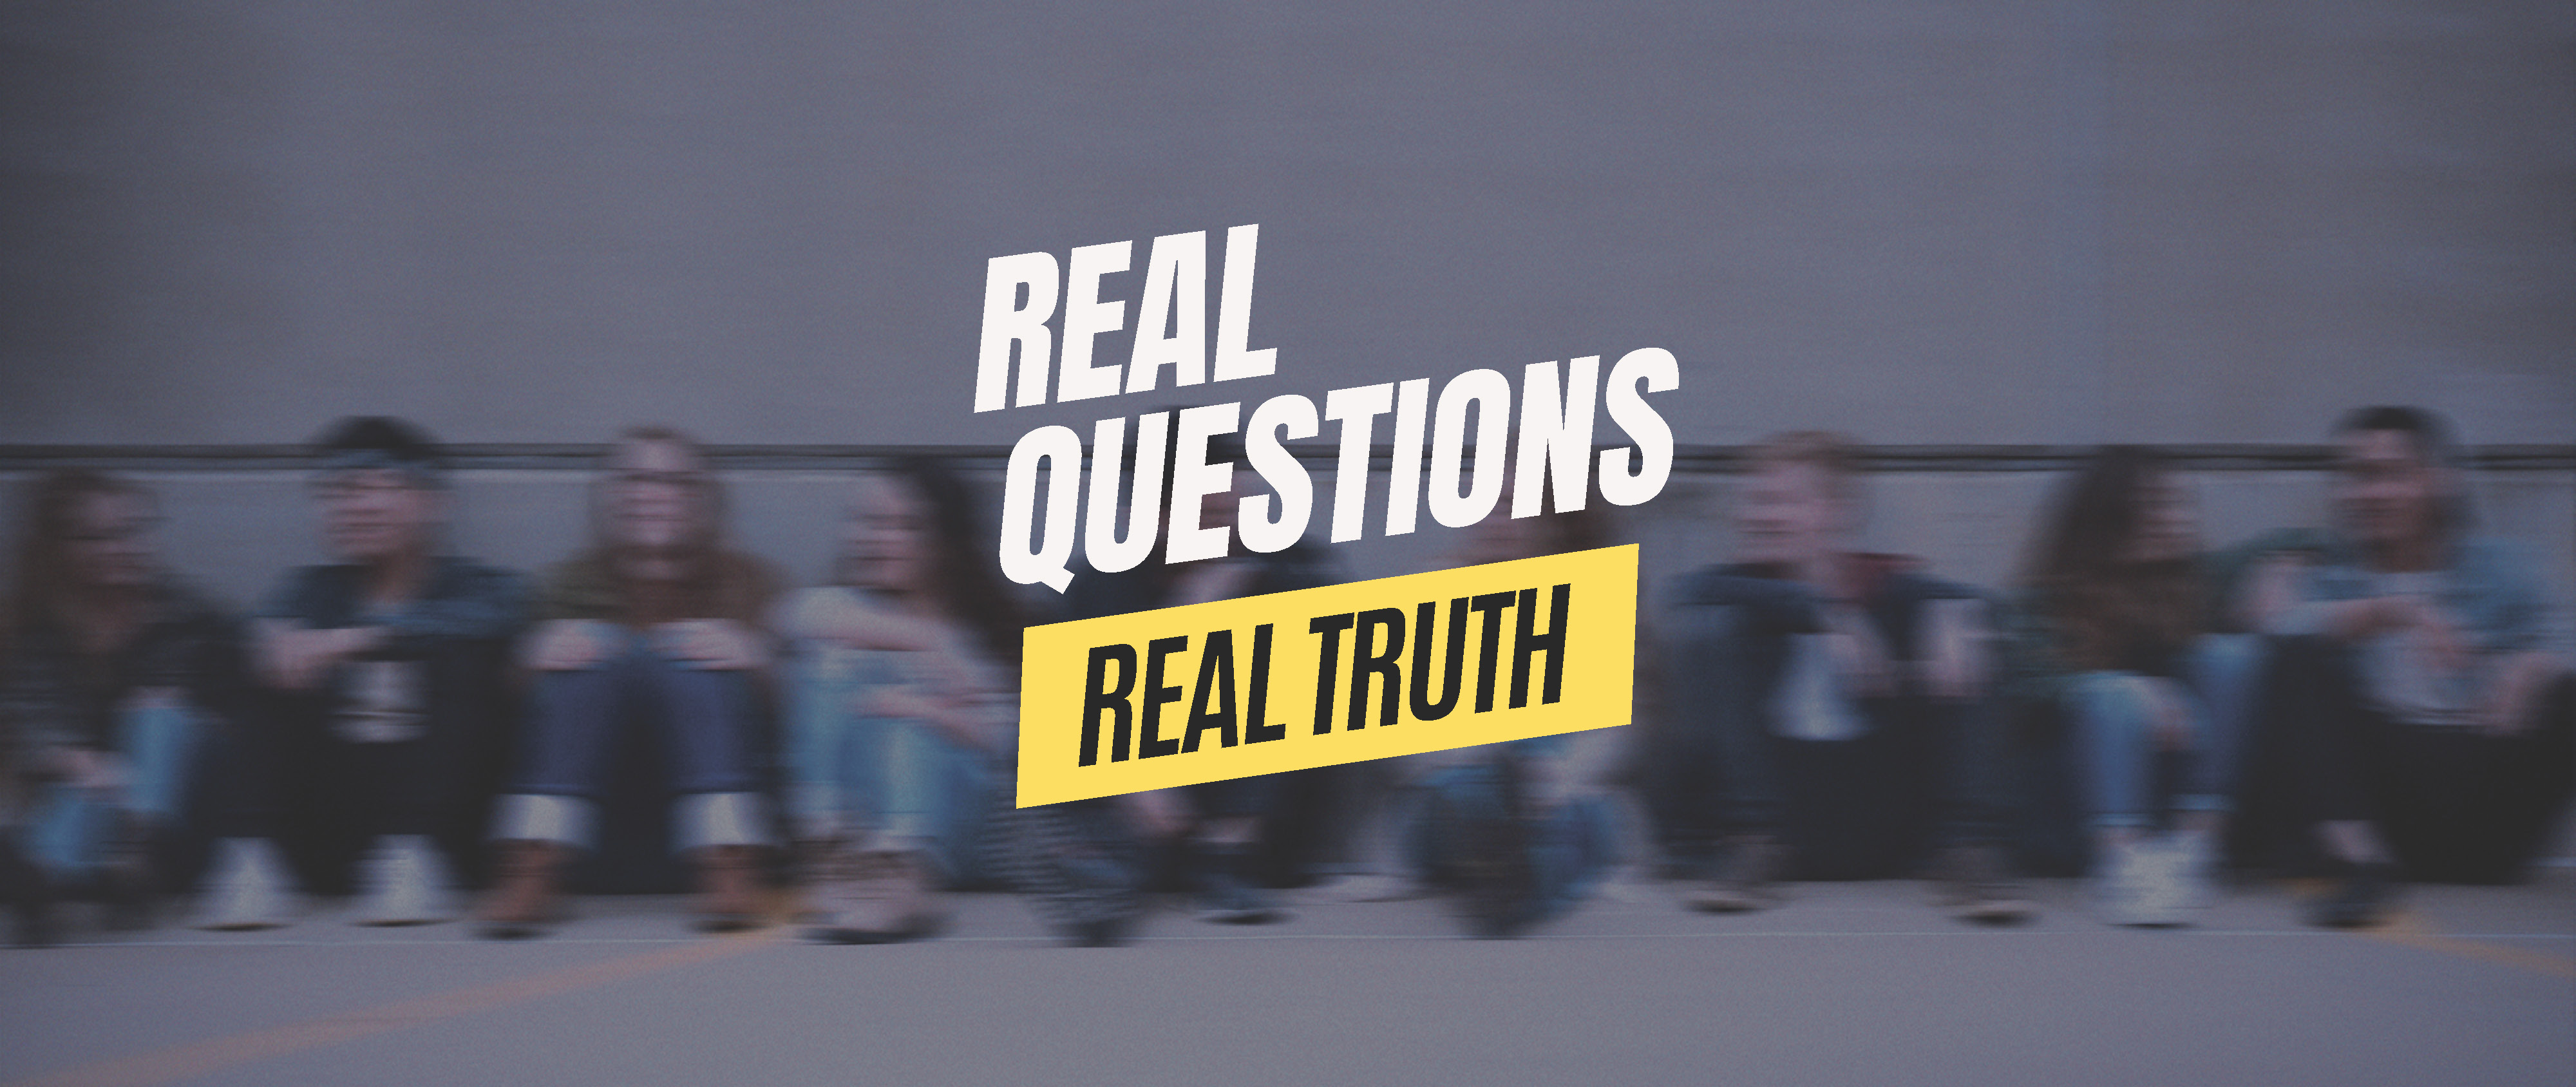 Real Questions Real Truth
YouTube channel for students
Watch Now!
